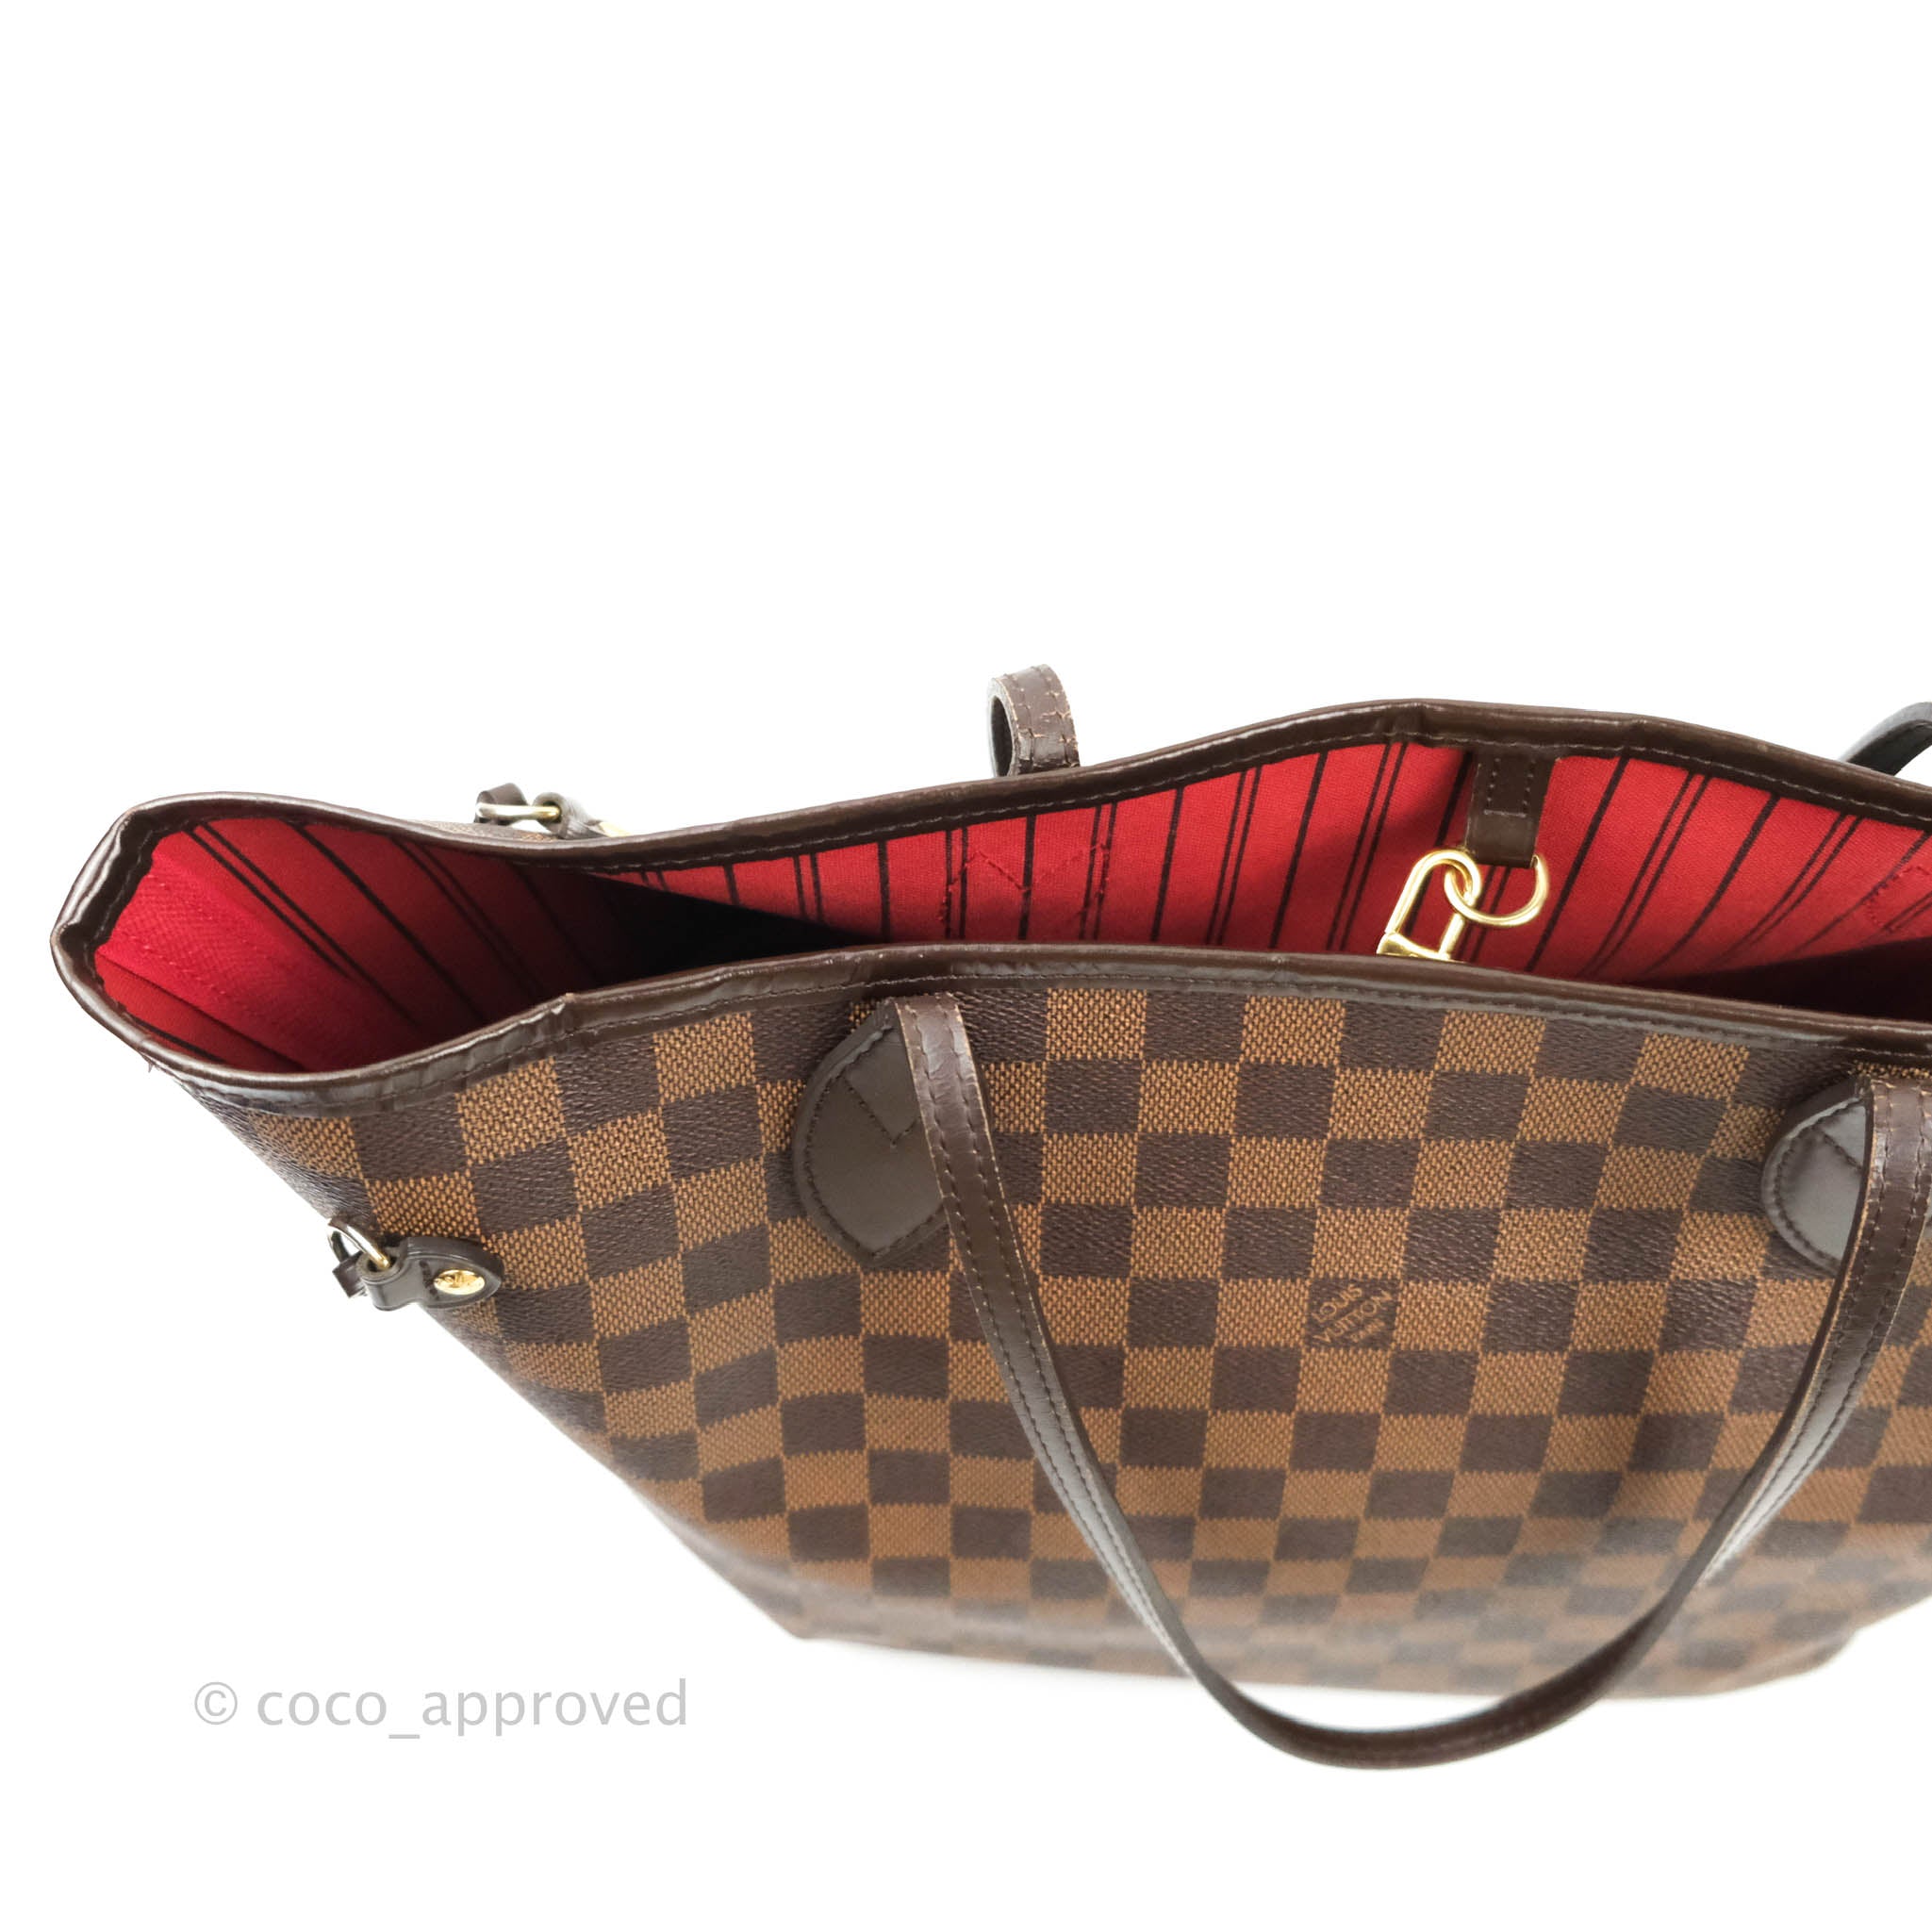 Sold at Auction: Louis Vuitton Damier Neverfull MM Tote Bag